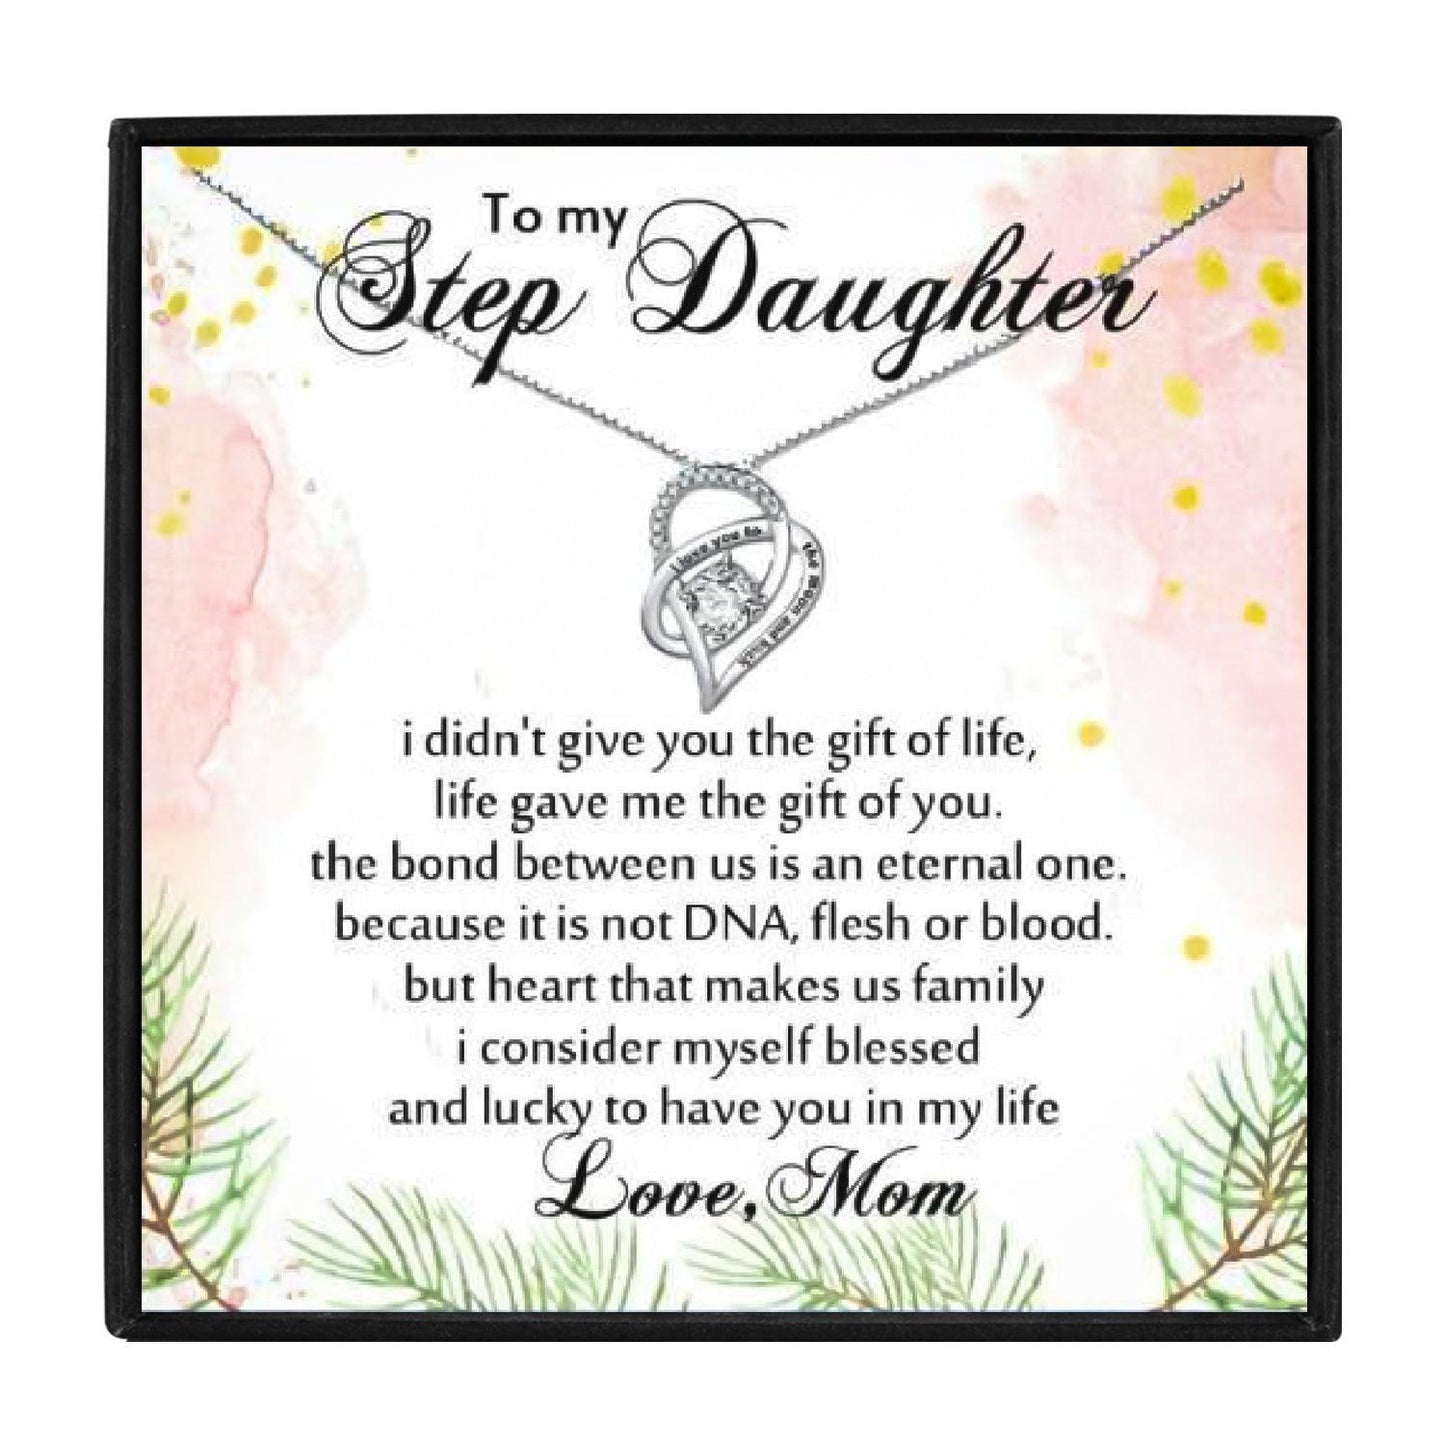 Step Daughter Necklace Gift Set From Mom for Christmas 2023 | Step Daughter Necklace Gift Set From Mom - undefined | Step Daughter Necklace, Step Daughter Necklace Gift Set | From Hunny Life | hunnylife.com